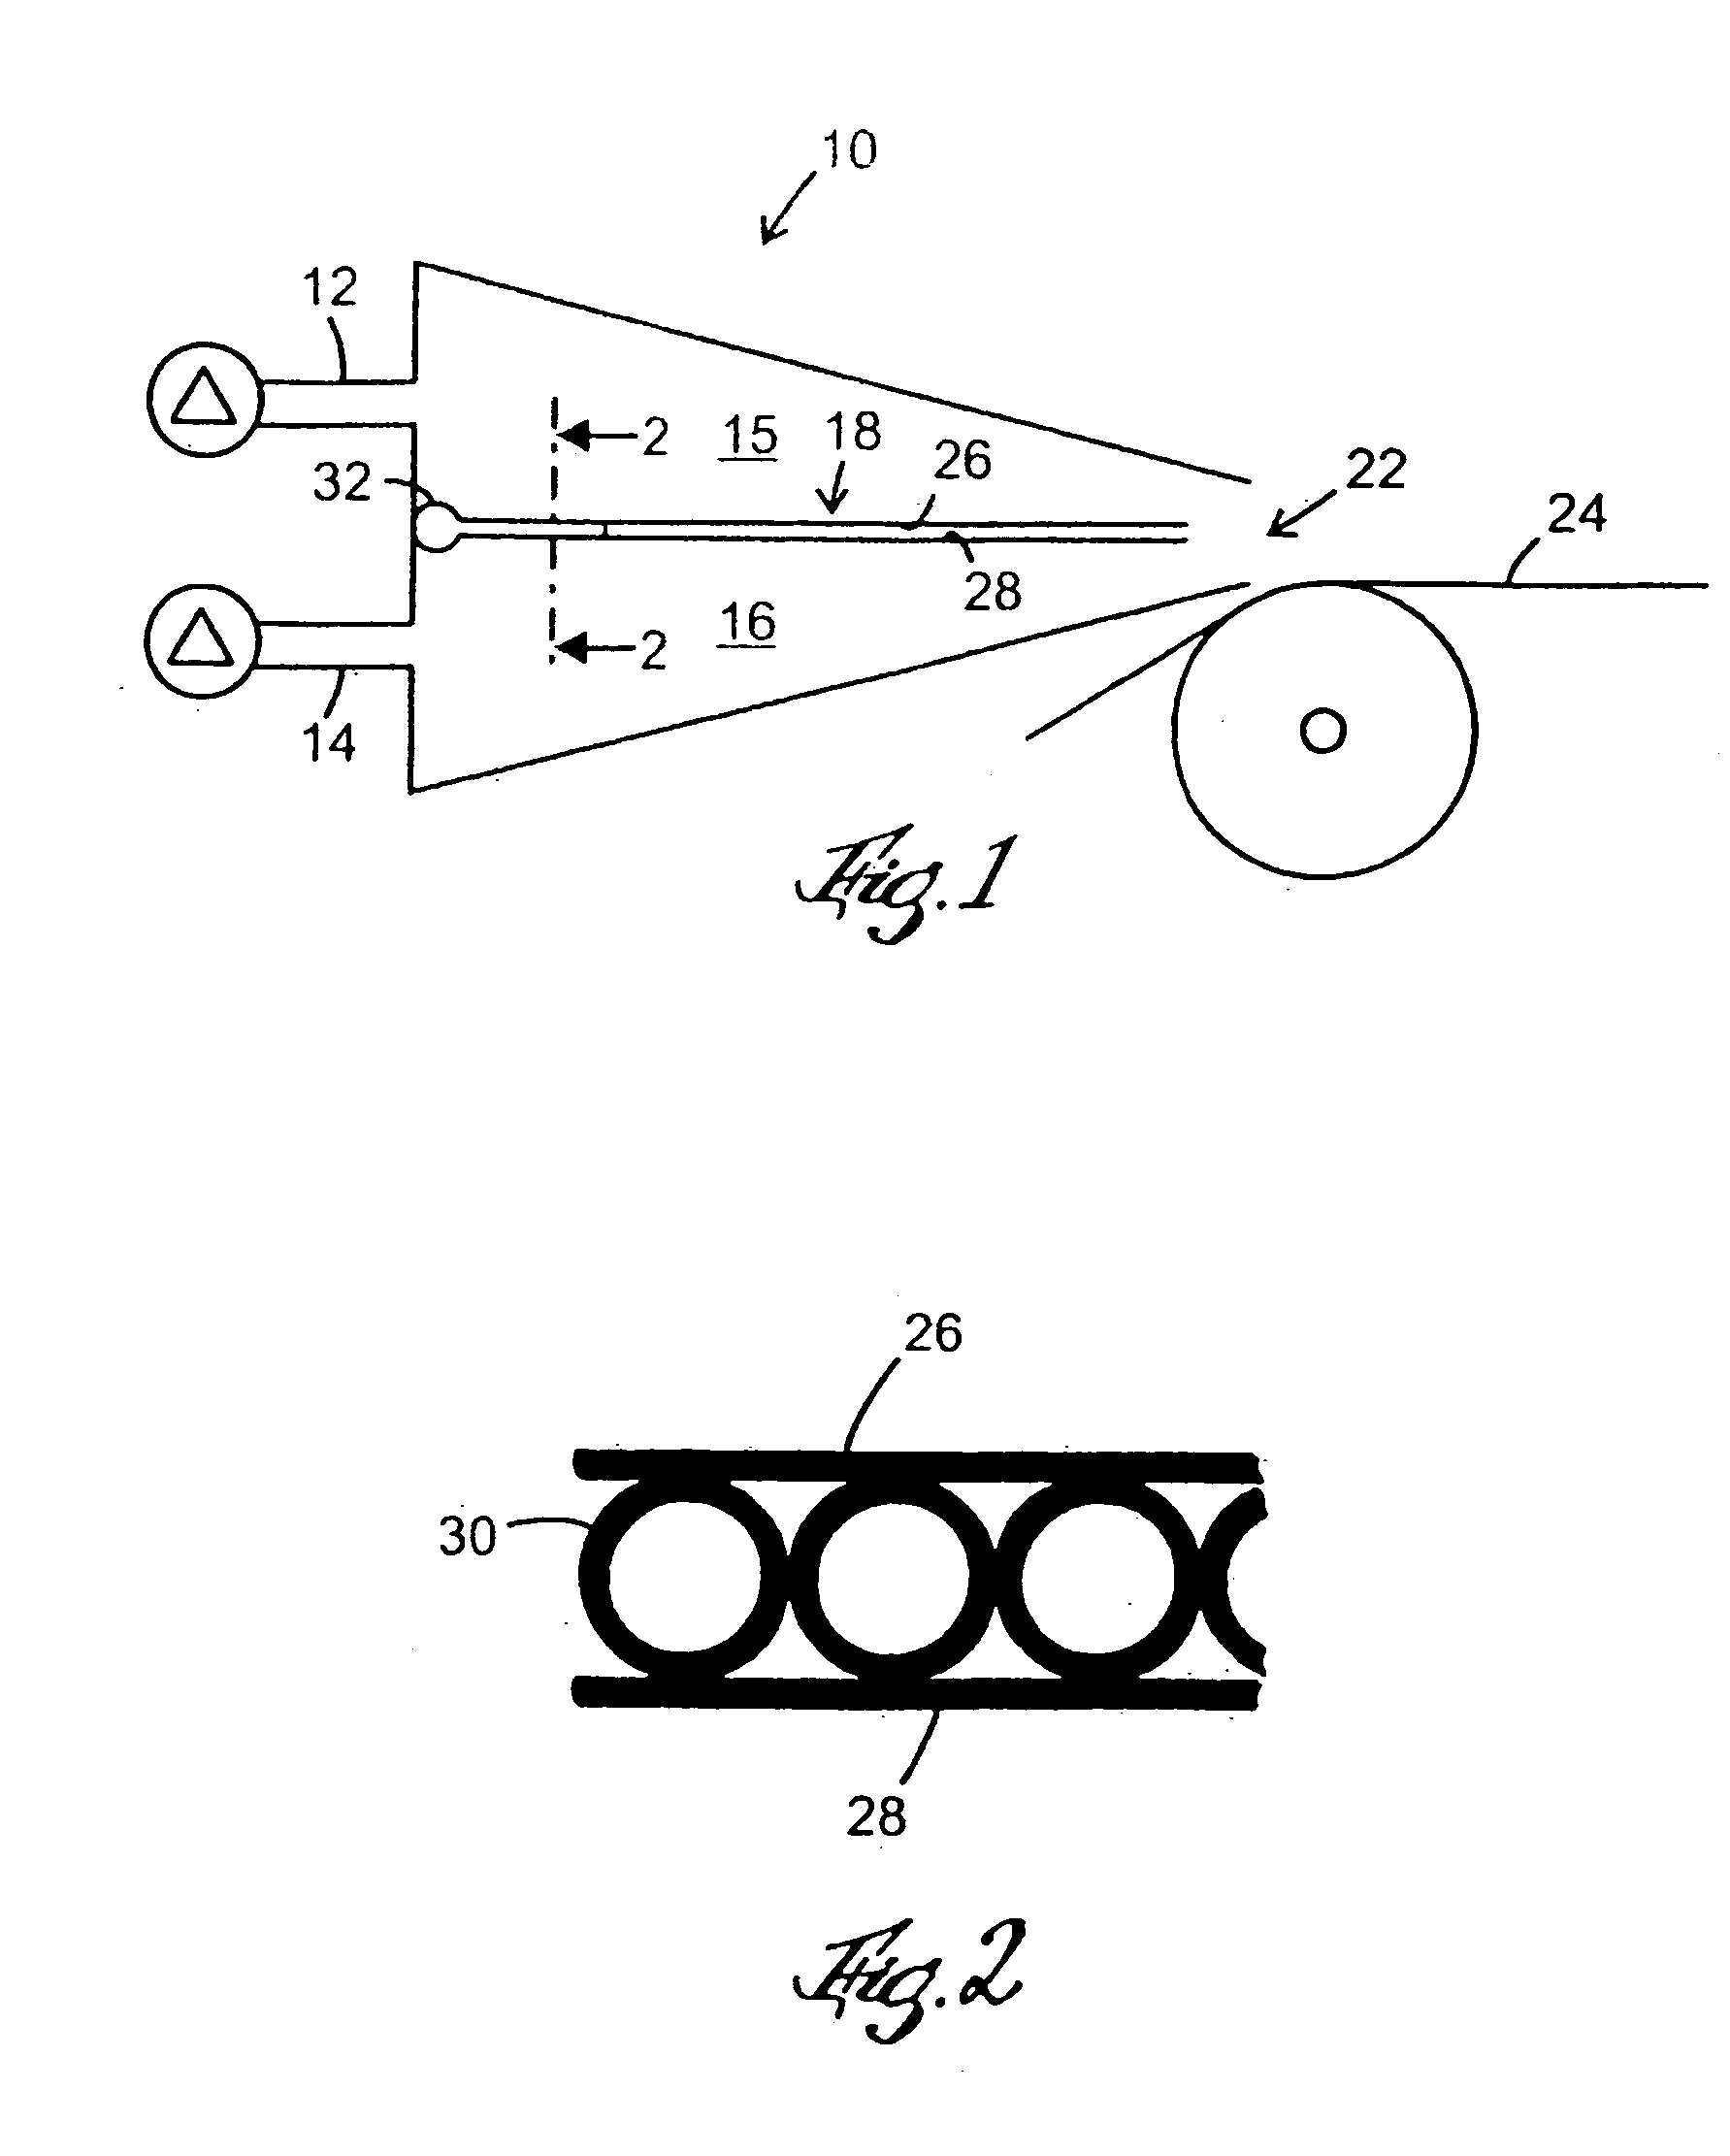 Method of forming a fibrous web and machine therefor